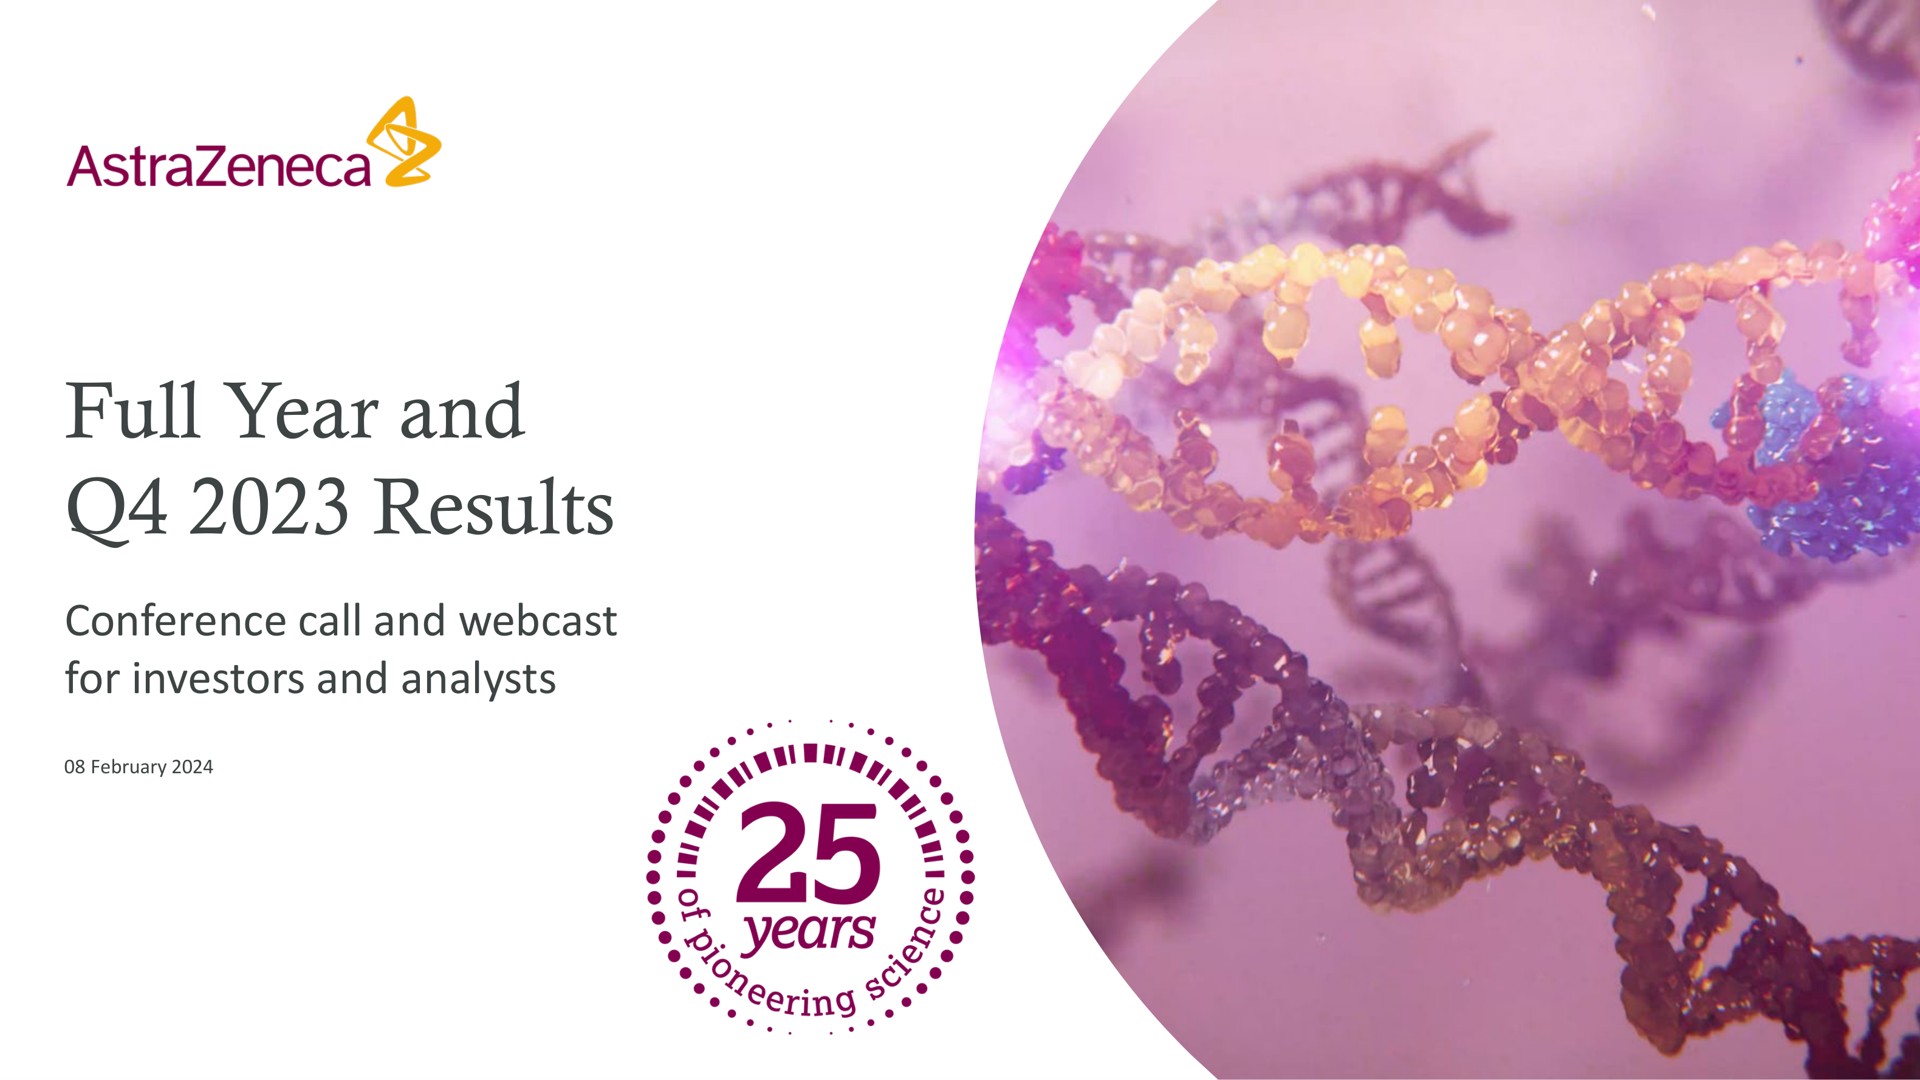 full year and results conference call and for investors and analysts years | AstraZeneca